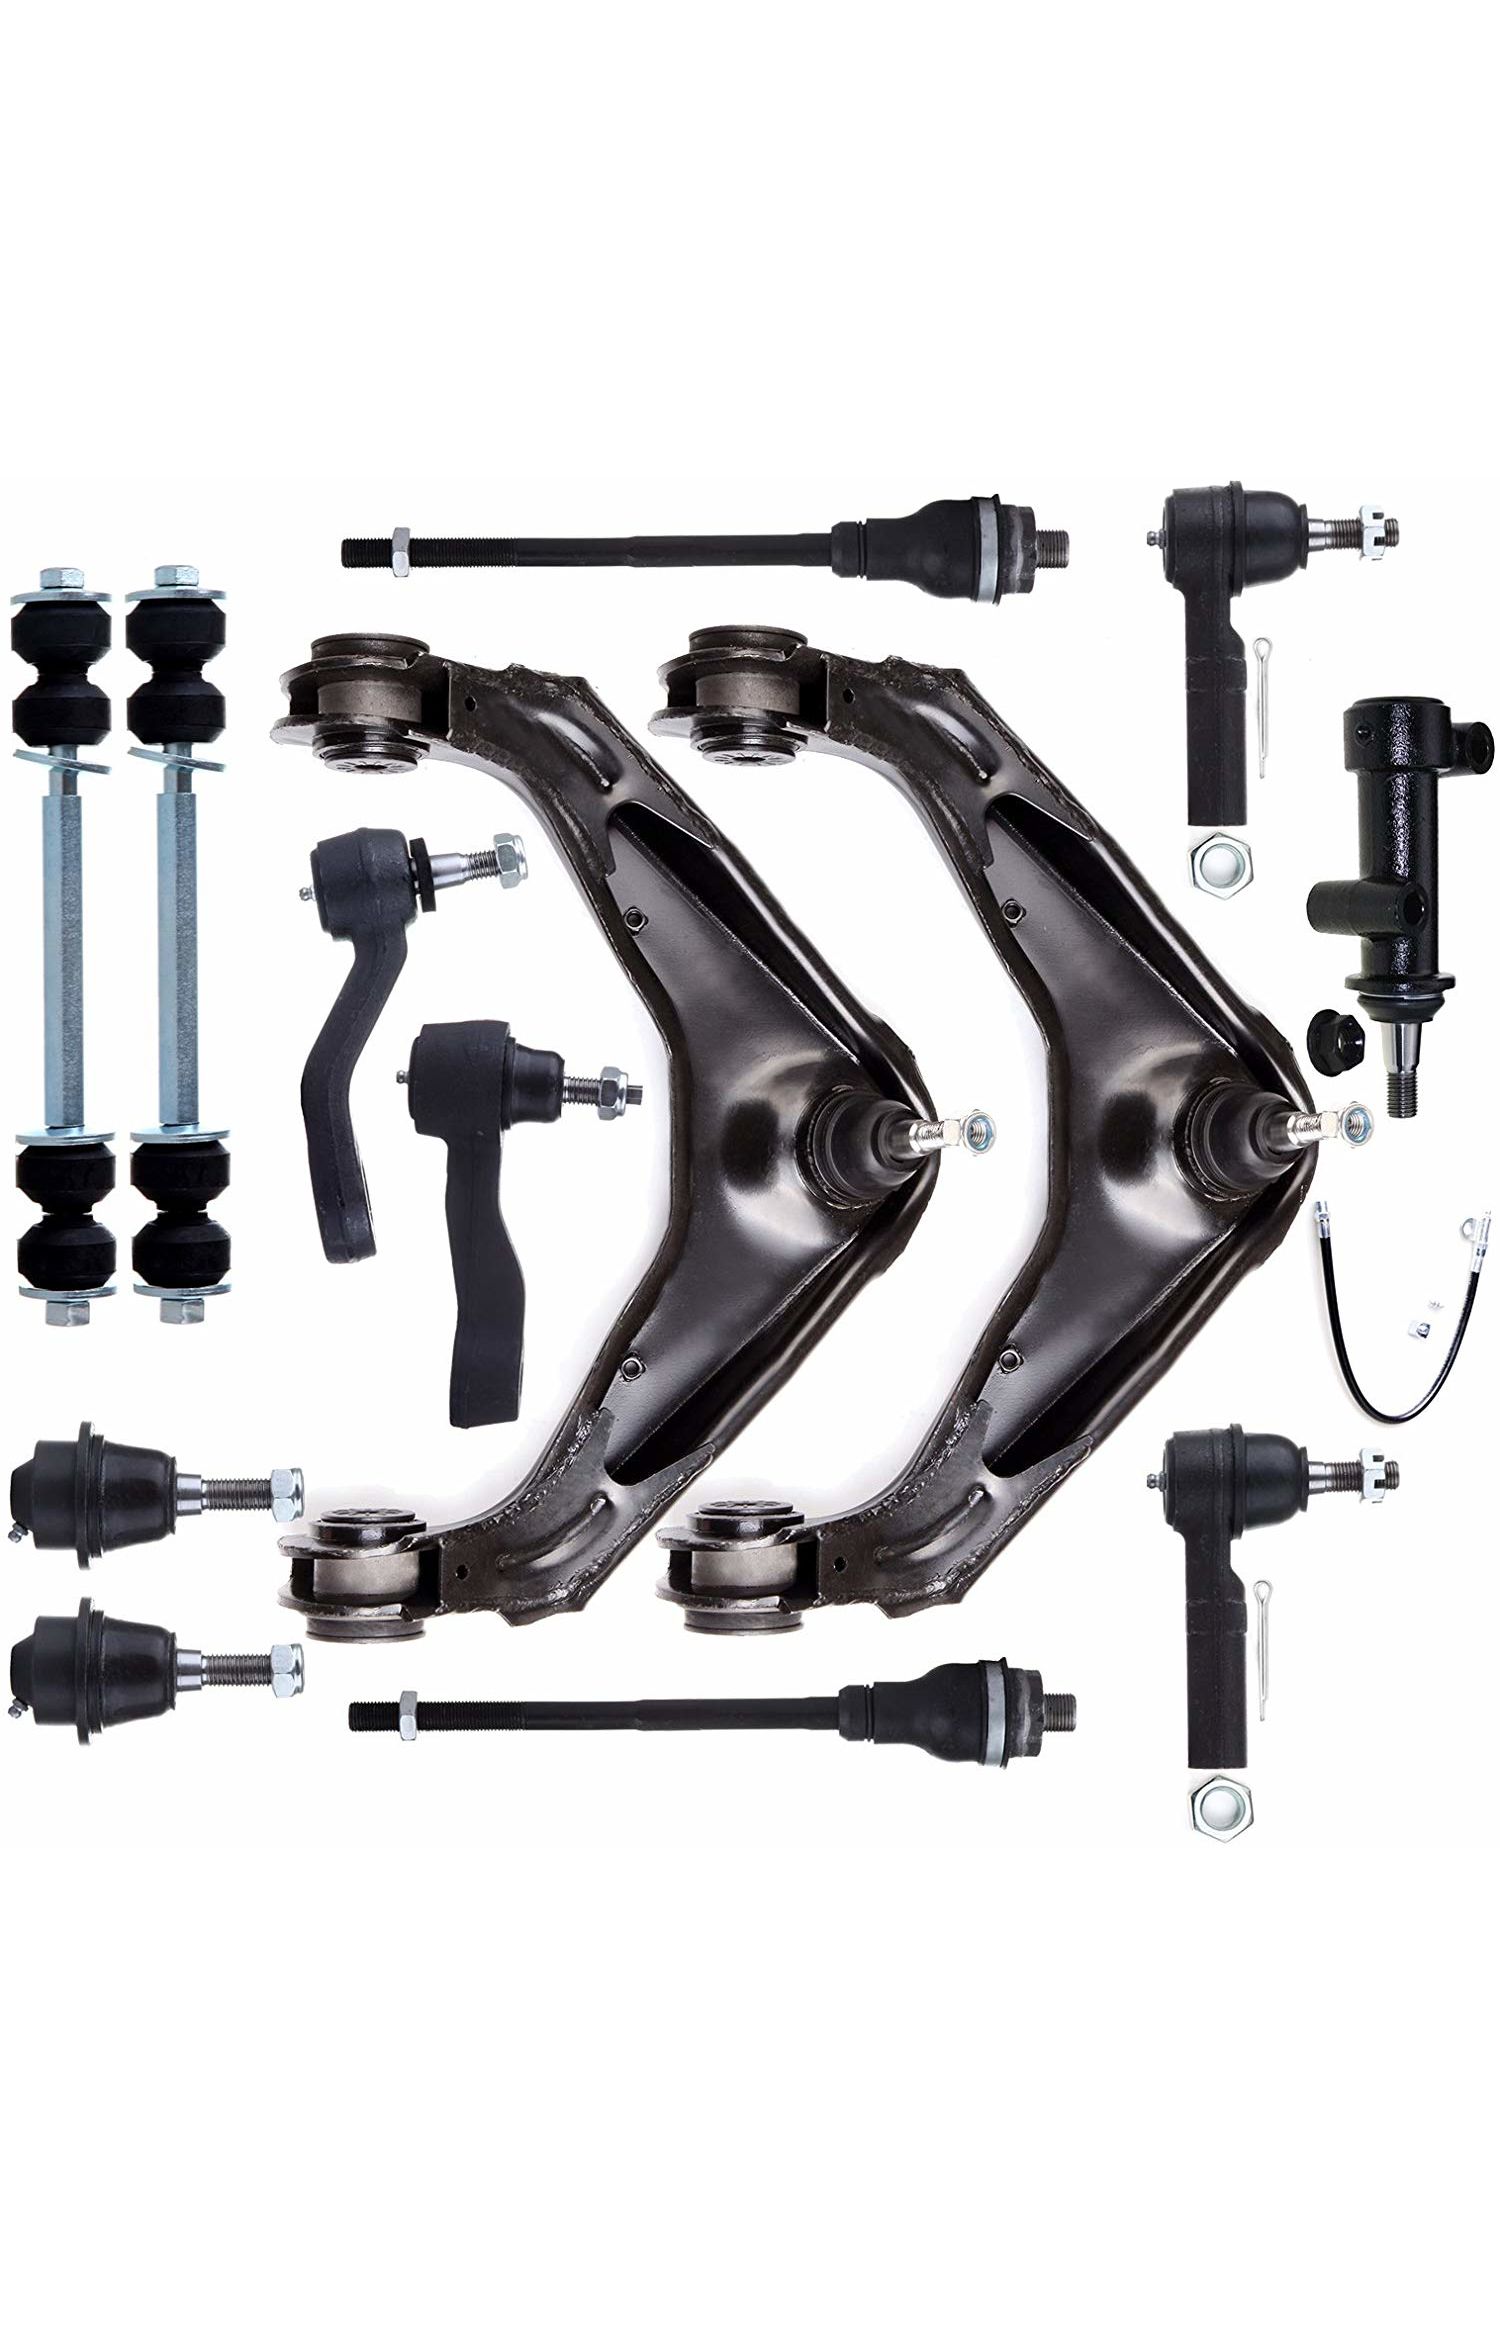 PartsW 15 Pc Steering & Suspension Kit for Suburban Sierra Avalanche Silverado Yukon H2 Control Arm & Ball Joint Offset Inner & Outer Tie Rod Sway Bars Idler Arm Assembly Idler & Pitman Arms 